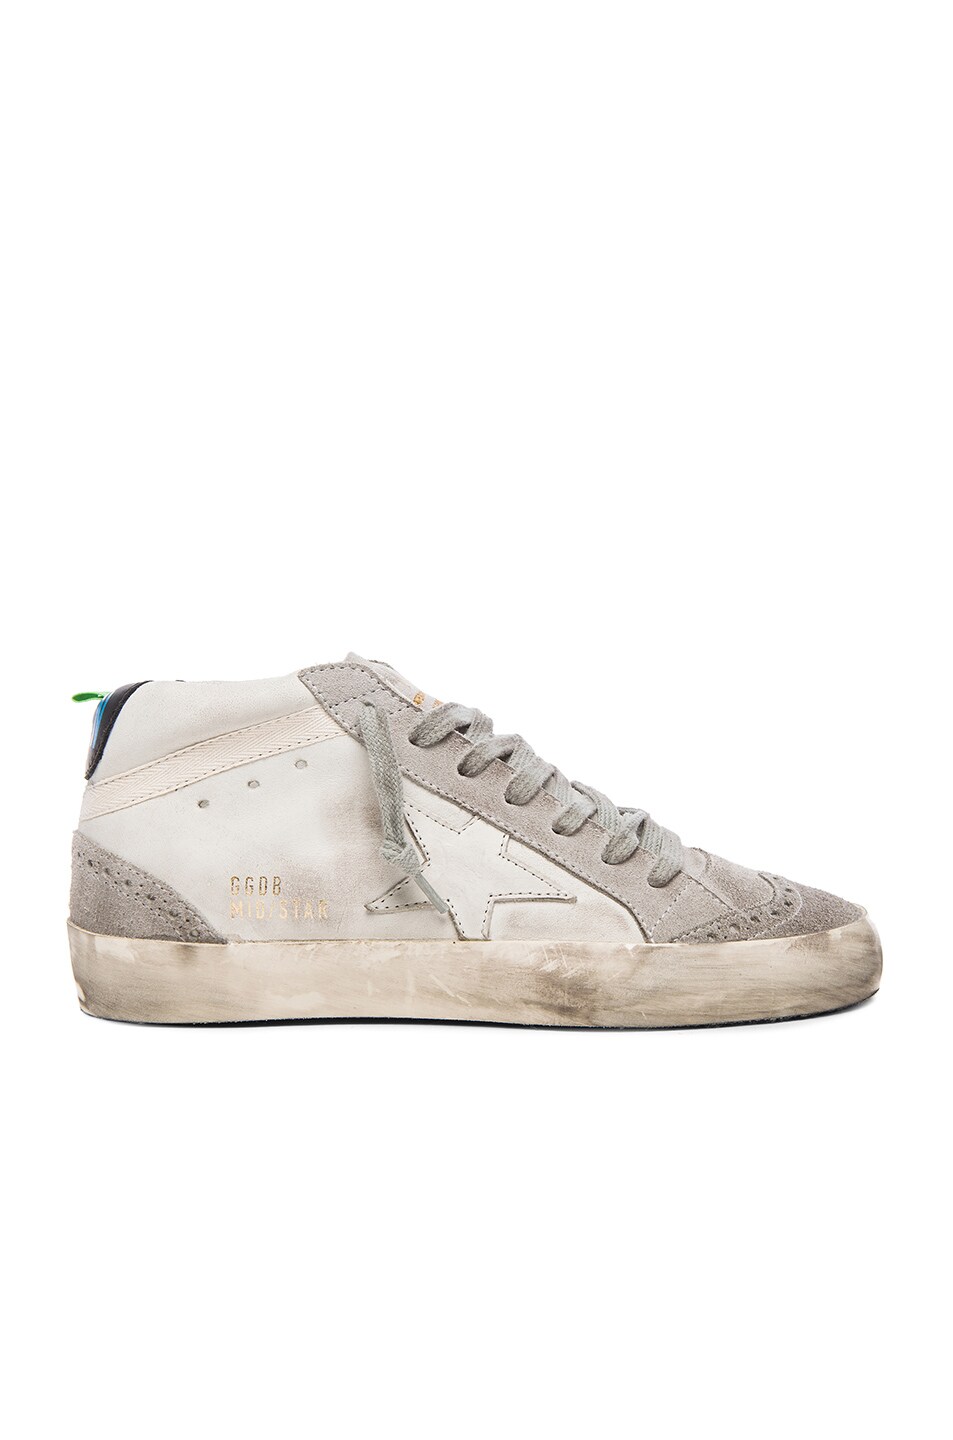 Image 1 of Golden Goose Mid Star Leather Sneakers in White